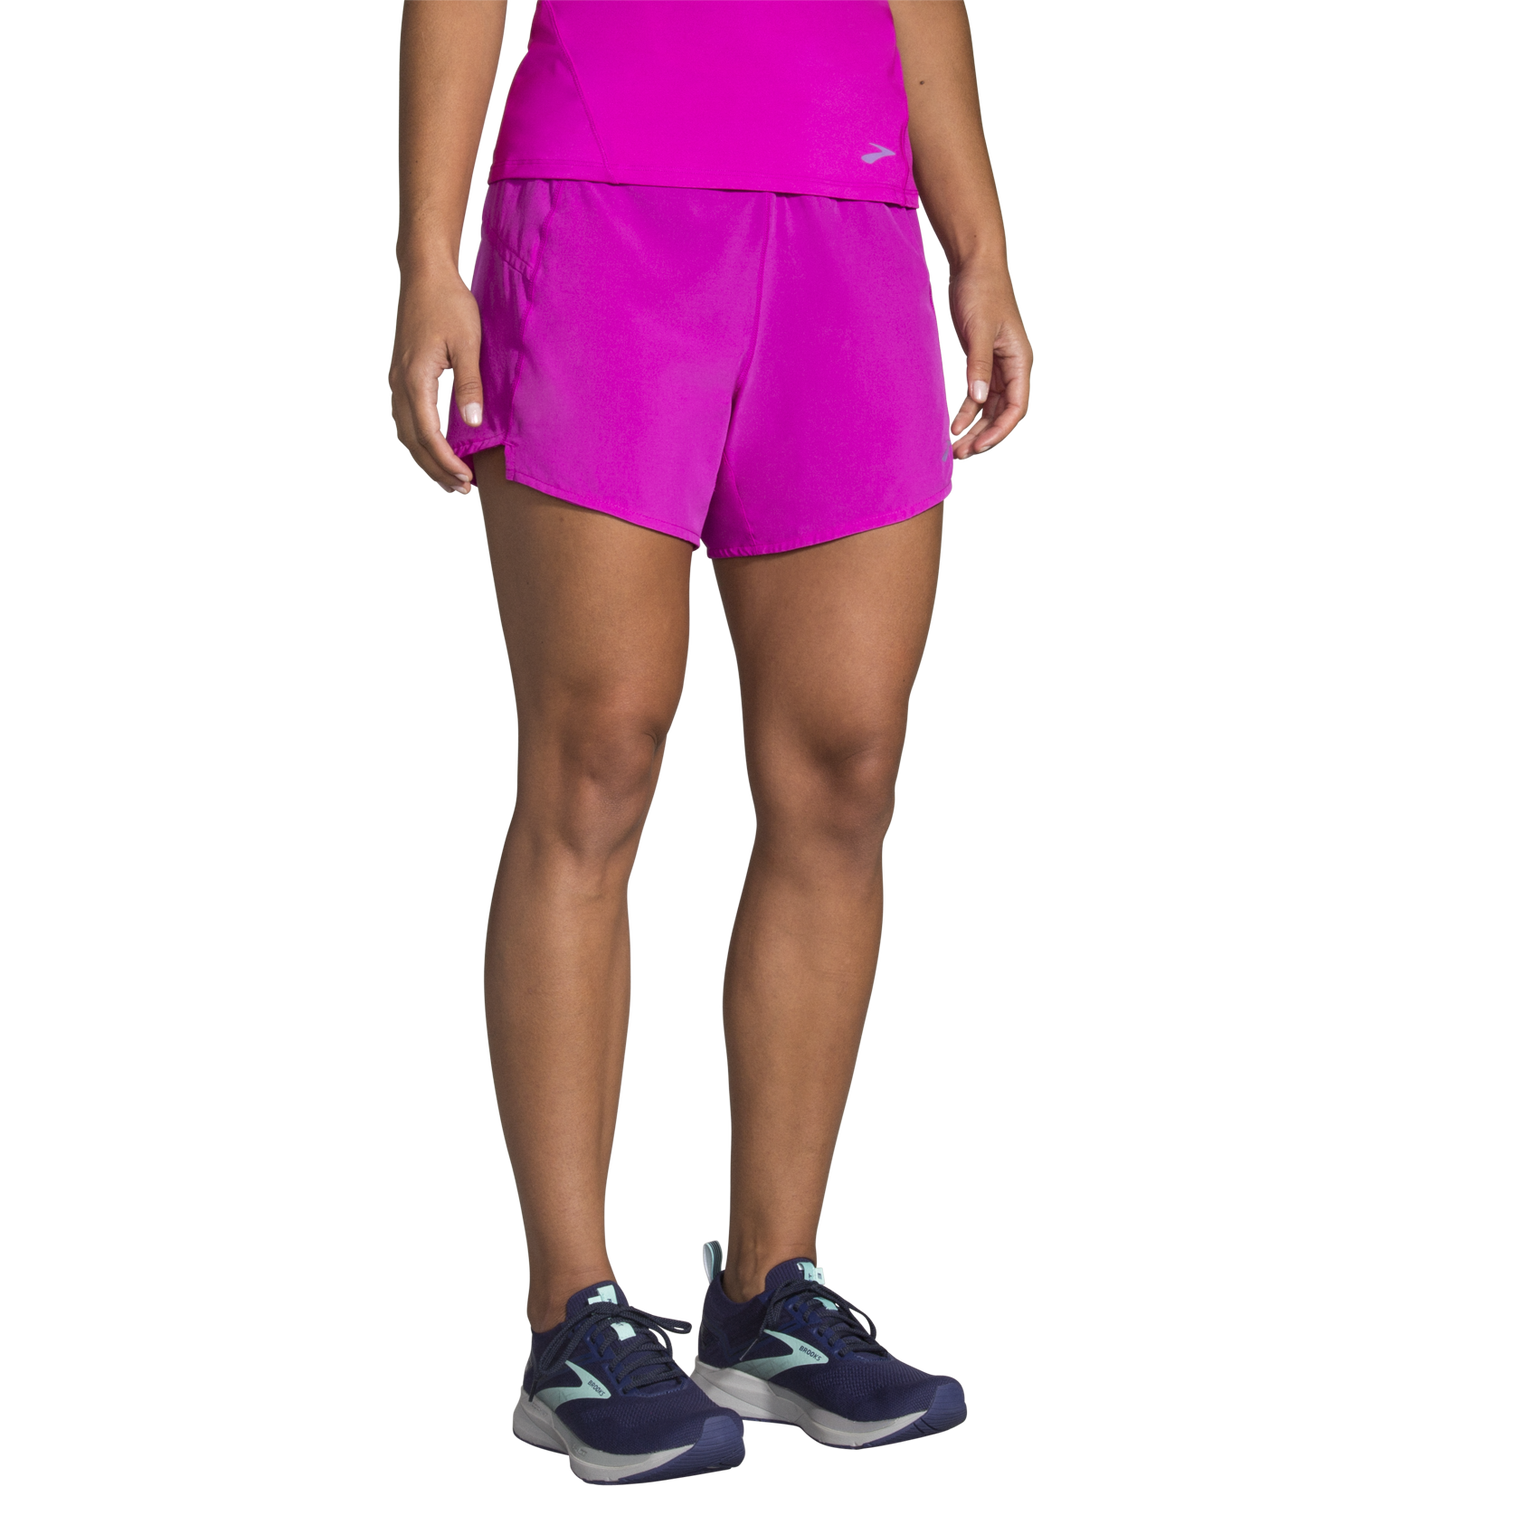 Chaser Women's 5 inch Running Shorts with Liner | Brooks Running